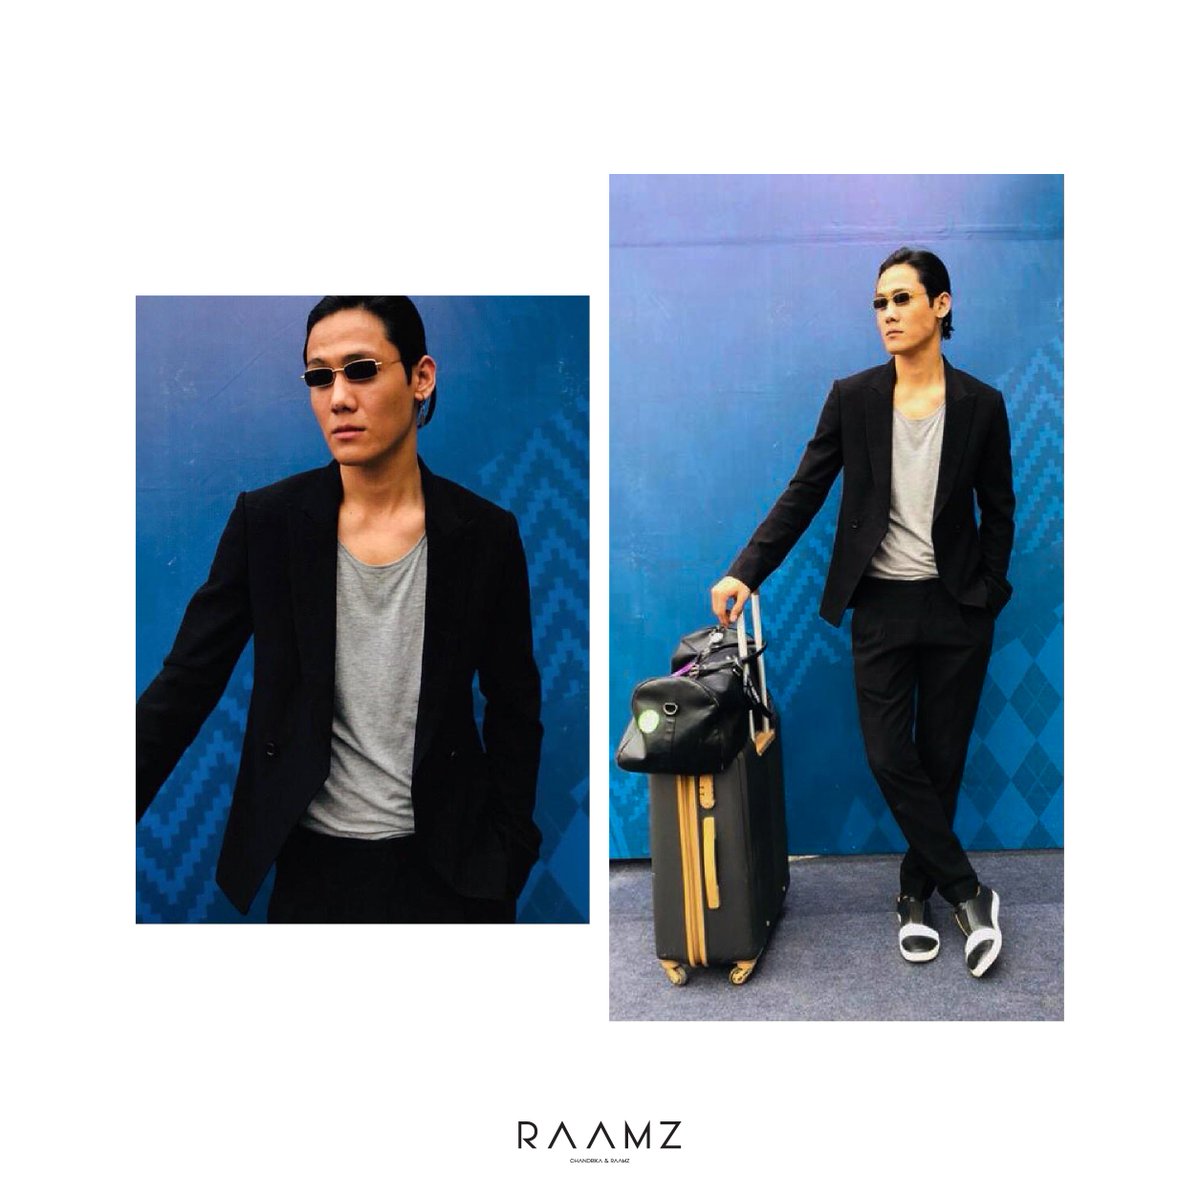 Zander, wearing a black statement piece by Raamz, at the Fashion Design Council of India. #Raamz #RaamzOfficial #ArjunZander #Fashion #FashionDesigner #FDCI #MenWithClass #MensFashion #Style #Black